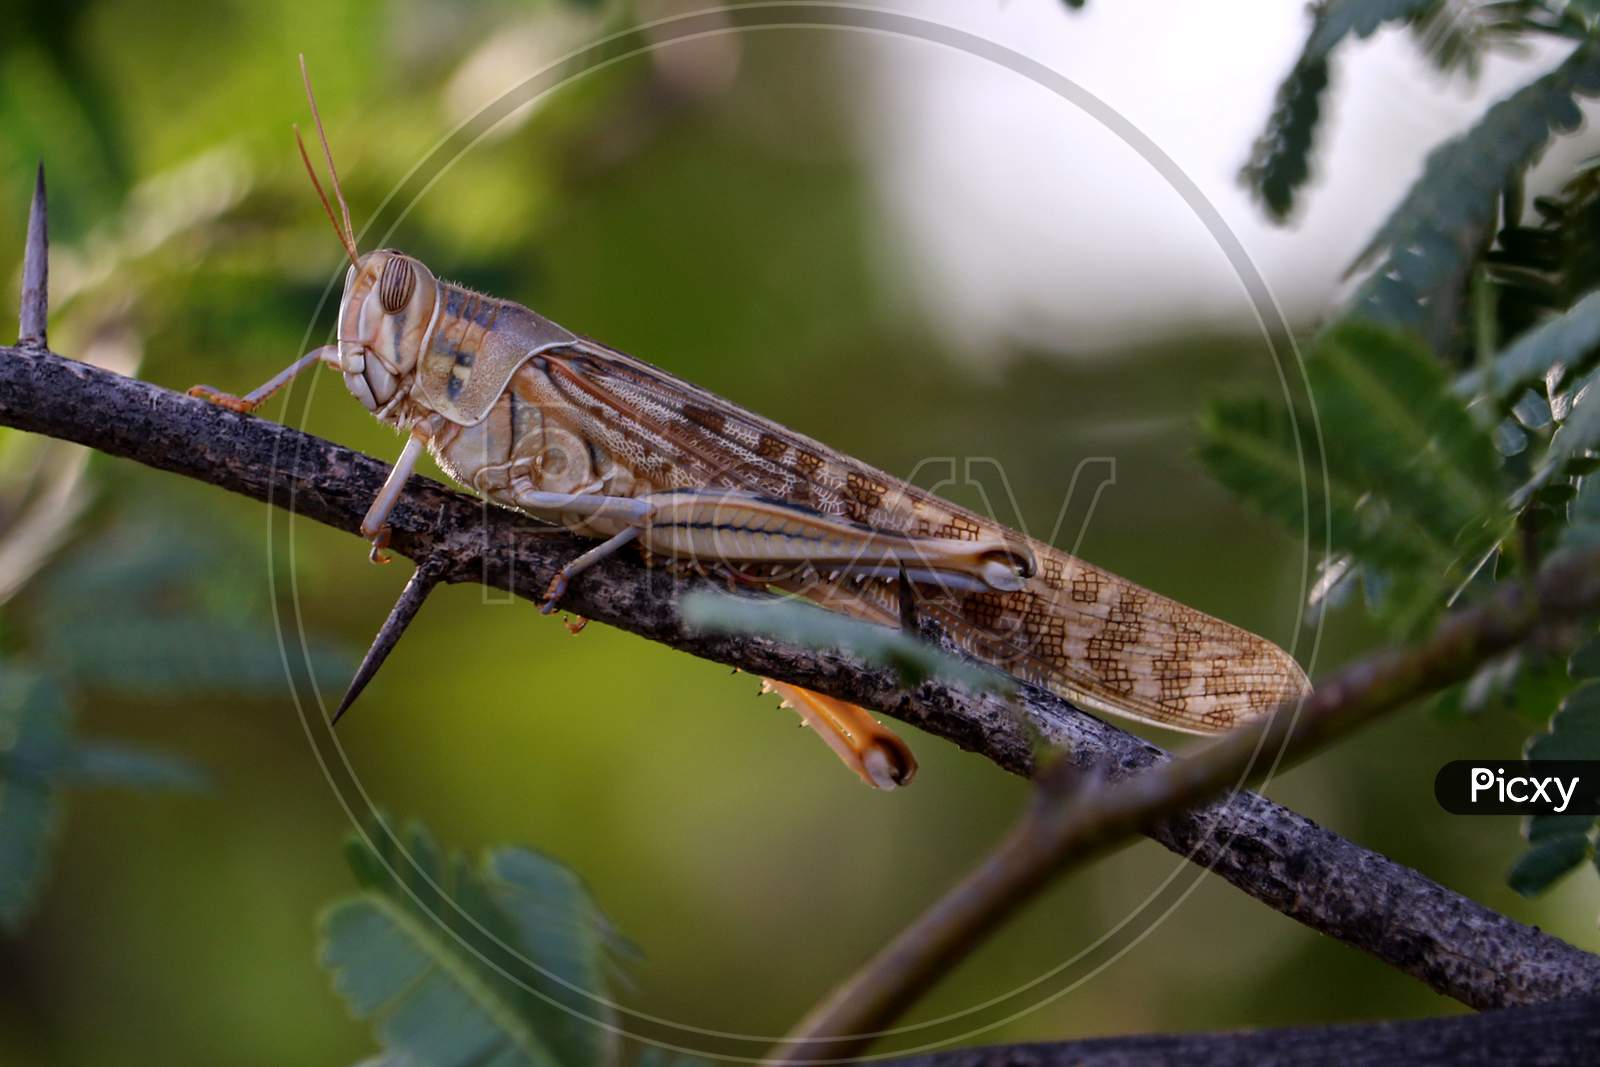 A Locust Spotted In The Outskirts Of Ajmer, Rajasthan On 15 June 2020.